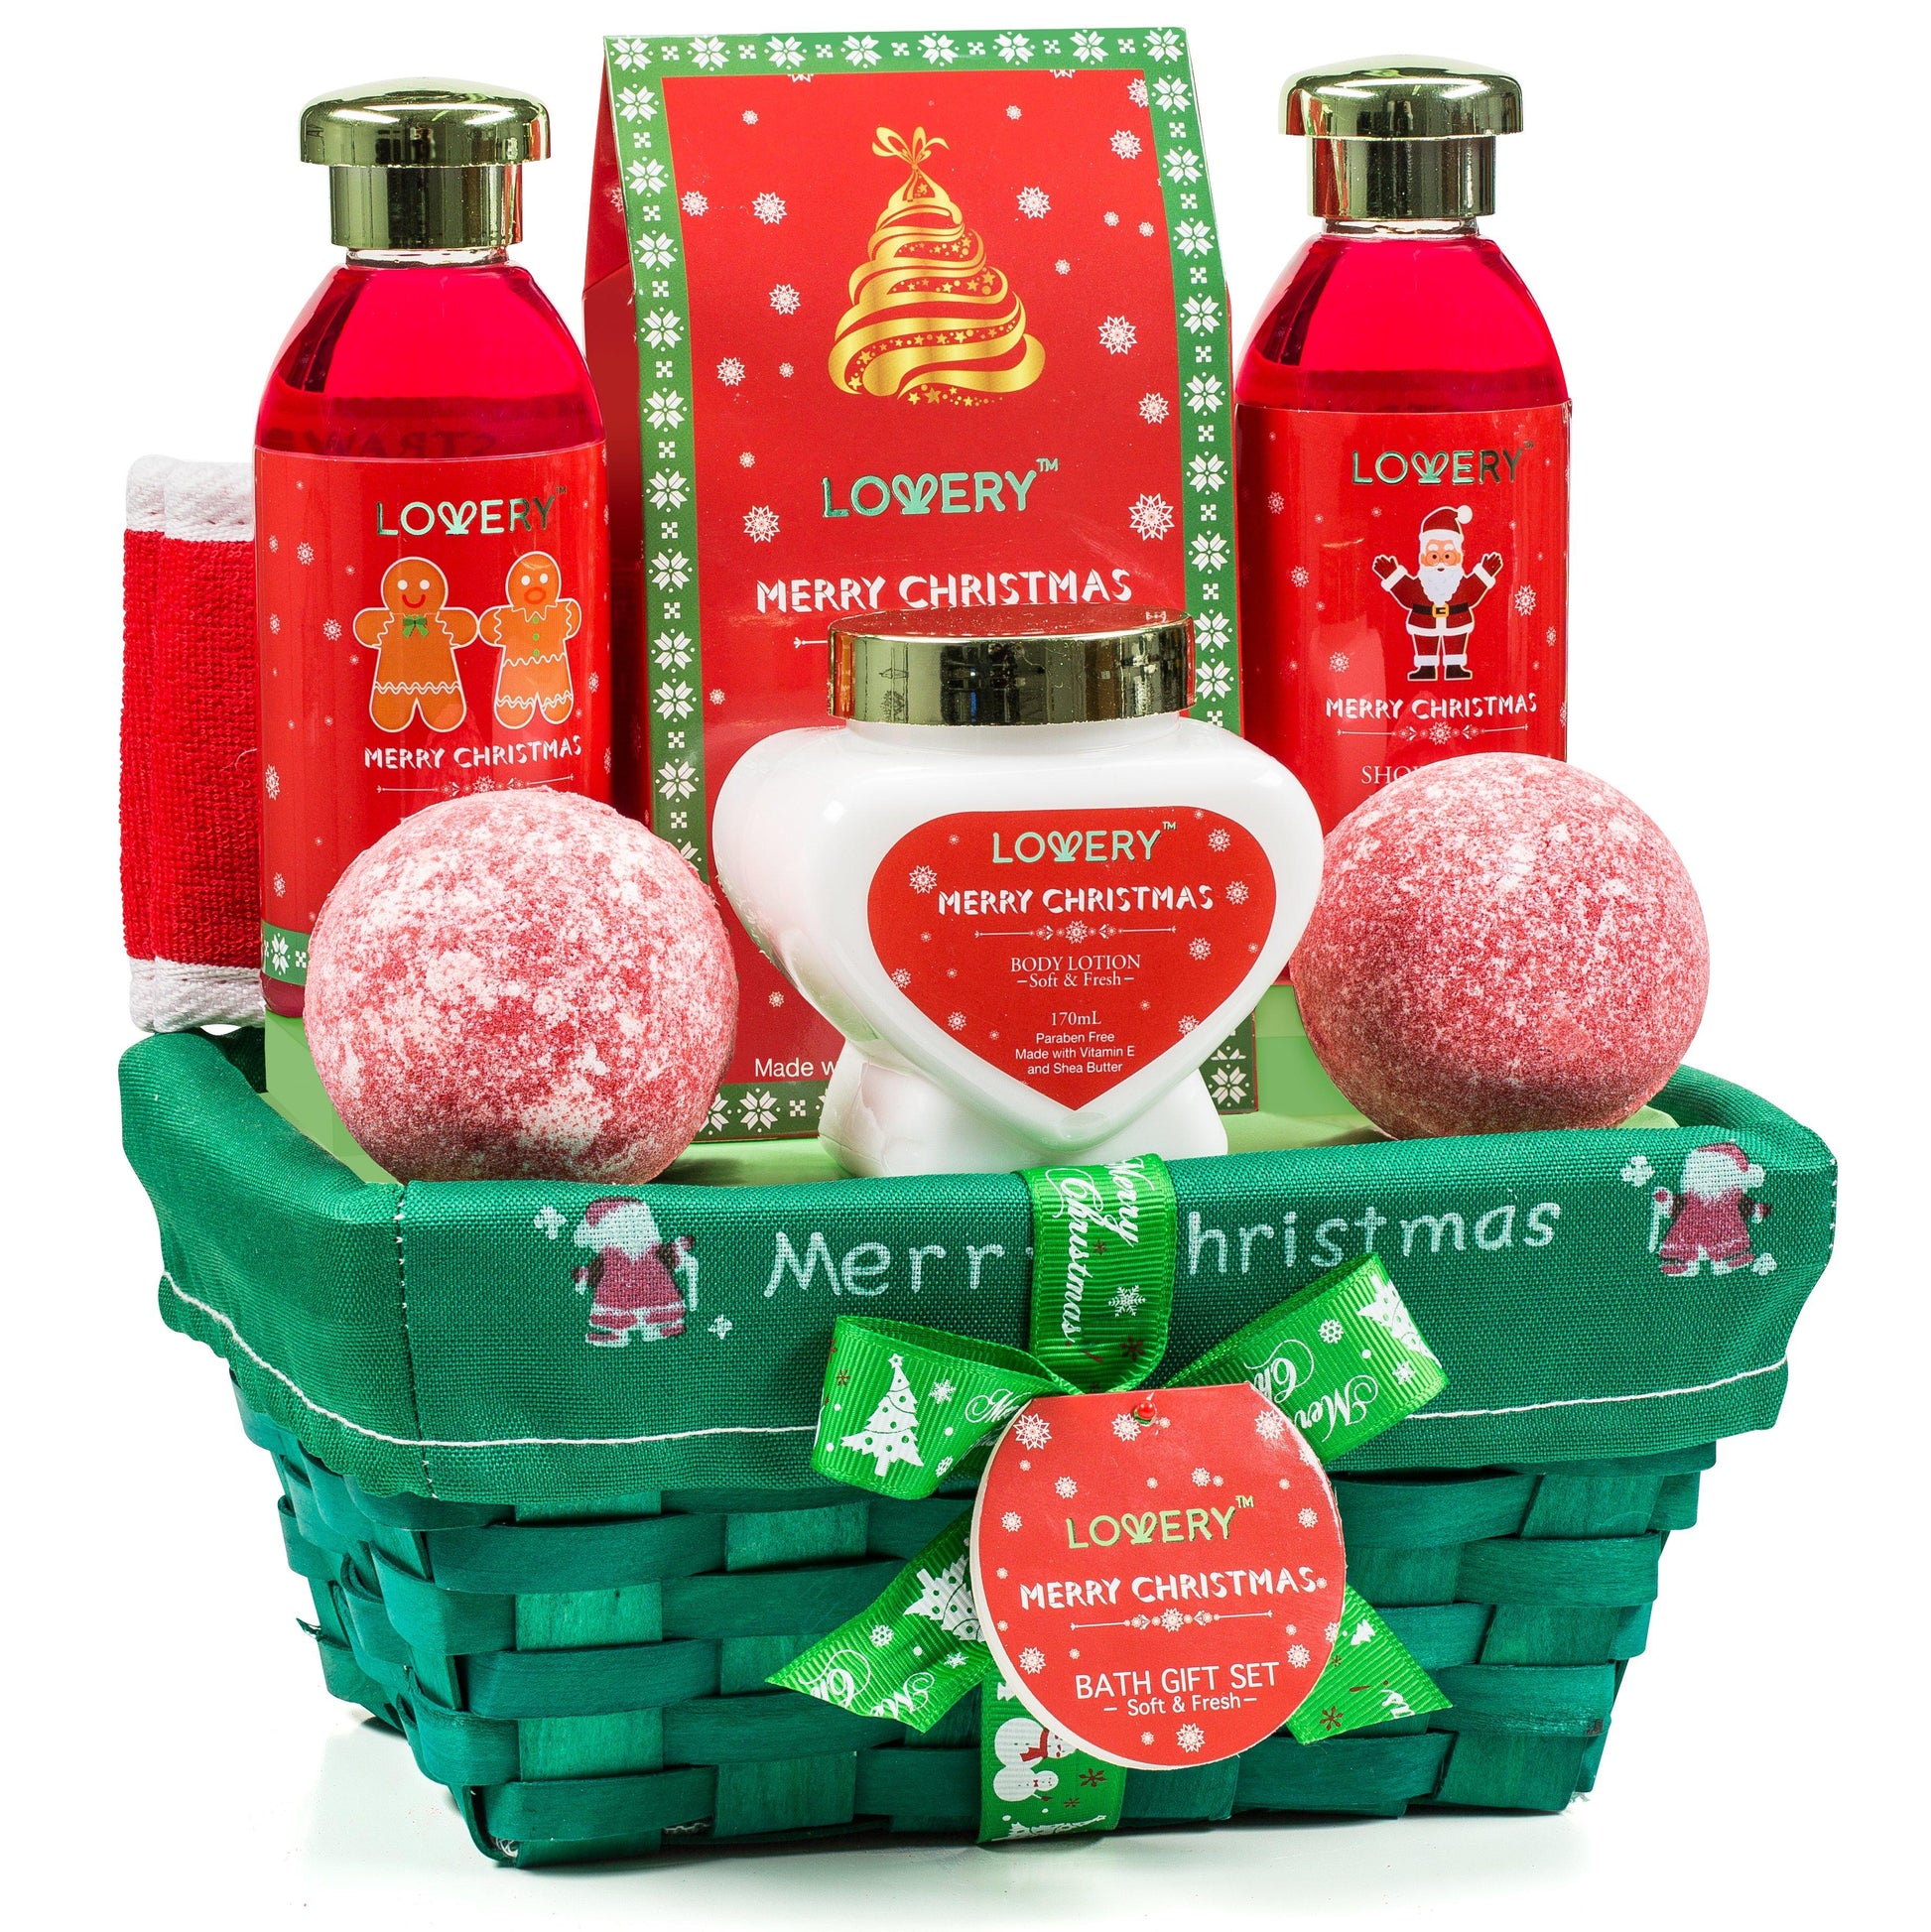 Christmas Bath Bomb Gift Set, lovery Merry Christmas Gift, lovery Strawberry Sandalwood, Merry Christmas Gift, Christmas Bath Bliss, Festive Bath Bomb Set, Holiday Spa Treats, Fruity Fragrance Delight, Calming Bath Essentials, Christmas Relaxation, Luxe Holiday Spa, Skin-Pampering Gift, Aromatherapy Spa Set, Stress Relief for Christmas